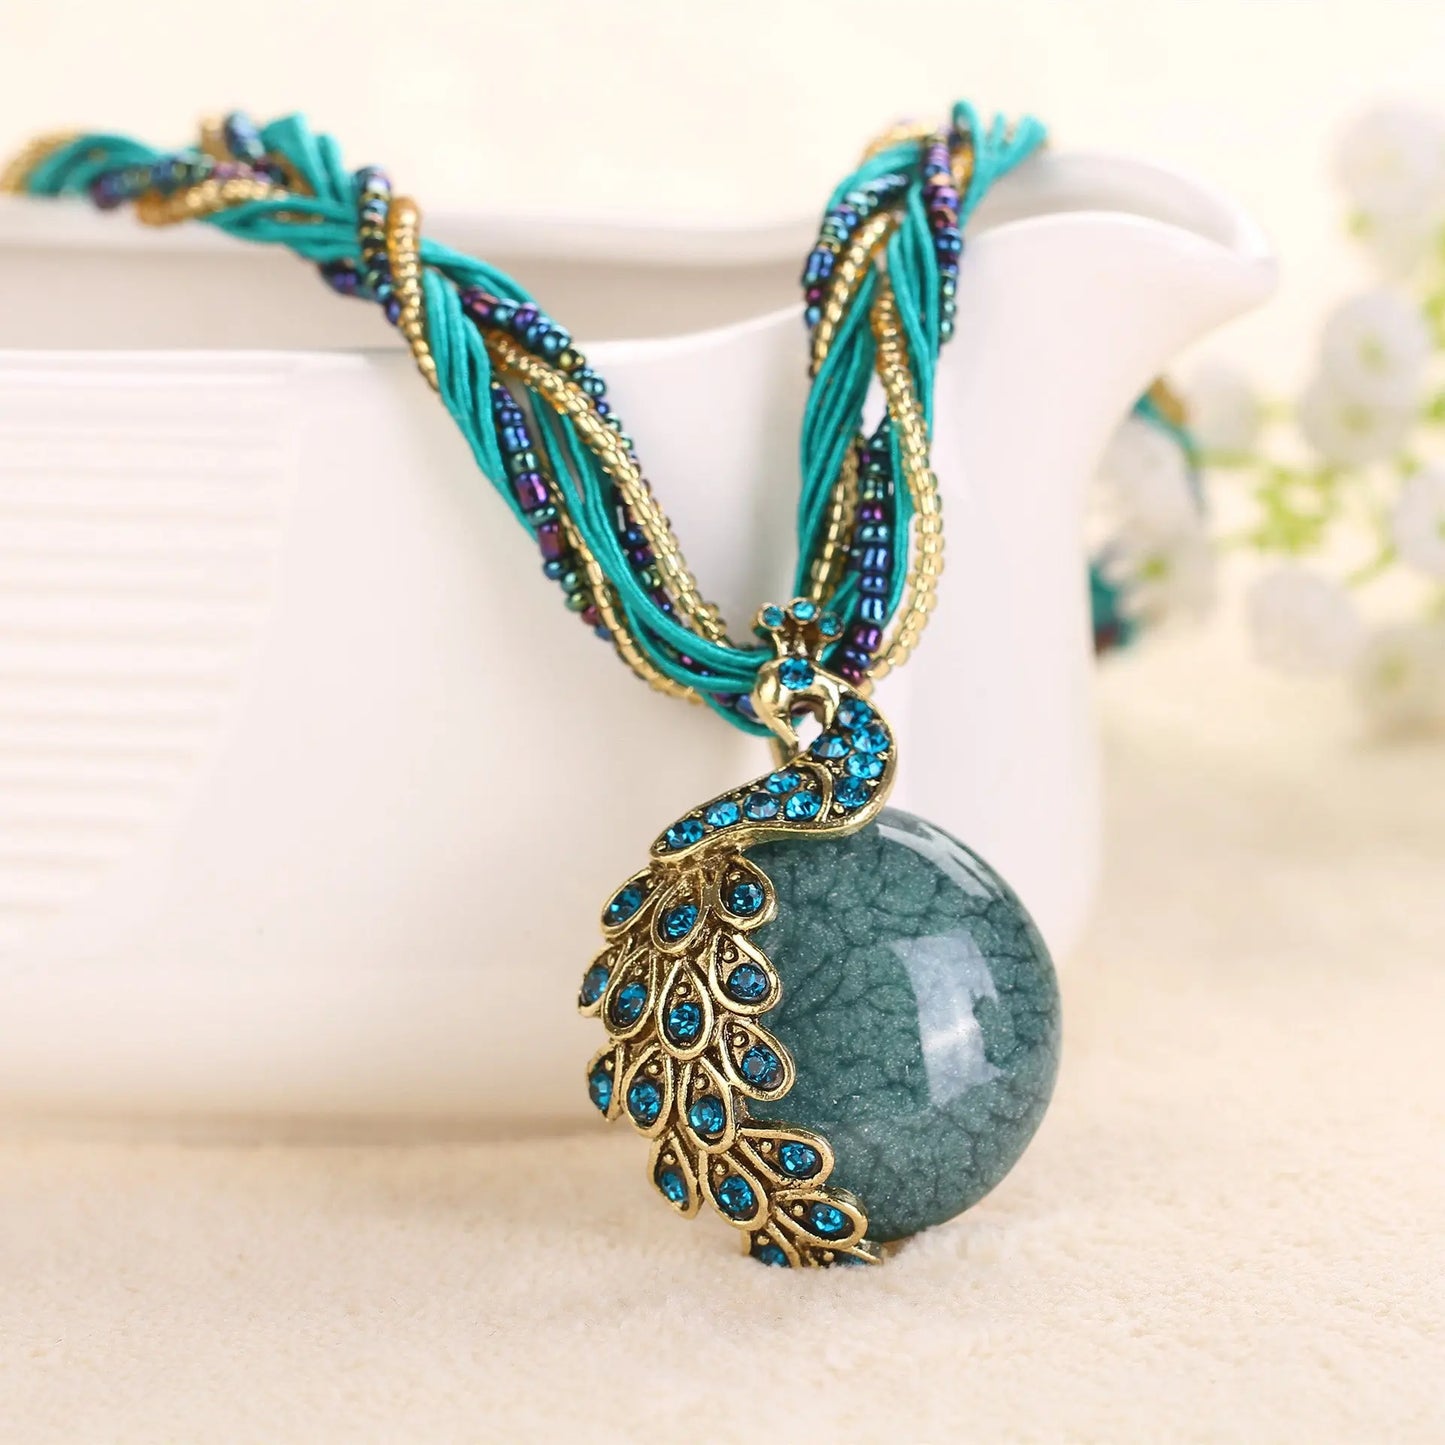 Boho Ethnic Jewelry Choker Handmade Pendant Necklace Natural Stone Bead Peacock Statement Maxi Necklace for Women Girls Gifts - Trending's Arena Beauty Boho Ethnic Jewelry Choker Handmade Pendant Necklace Natural Stone Bead Peacock Statement Maxi Necklace for Women Girls Gifts Electronics Facial & Neck dark-green